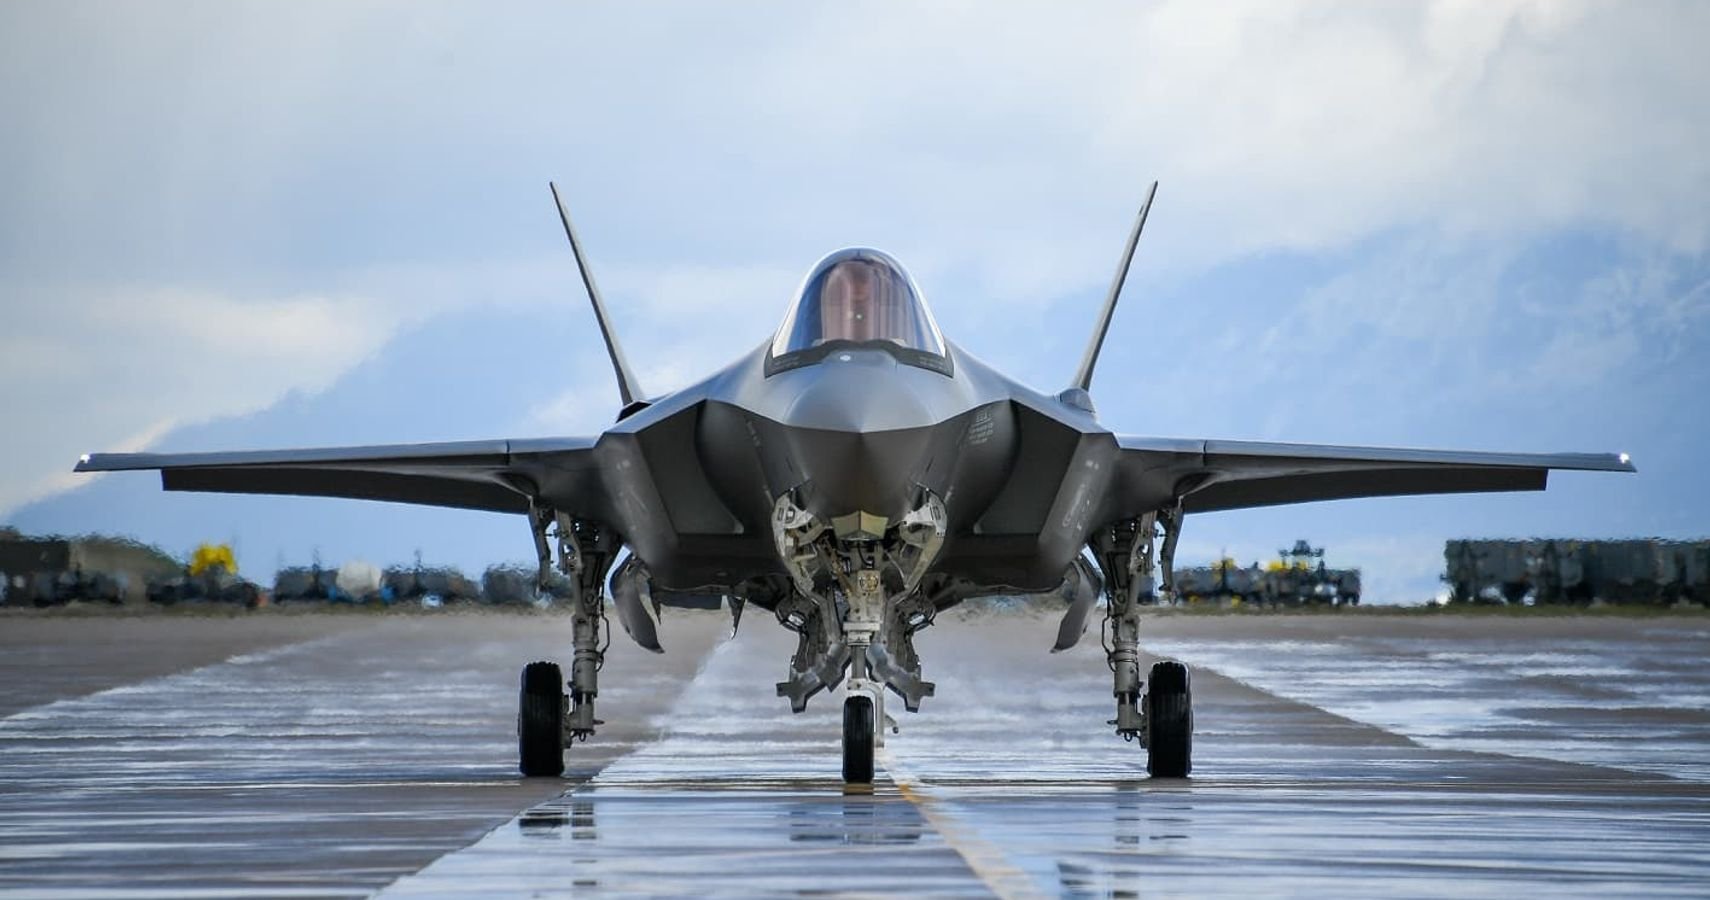 Here's How The F-35 Lightning II Represents The Pinnacle Of Aircraft Technology